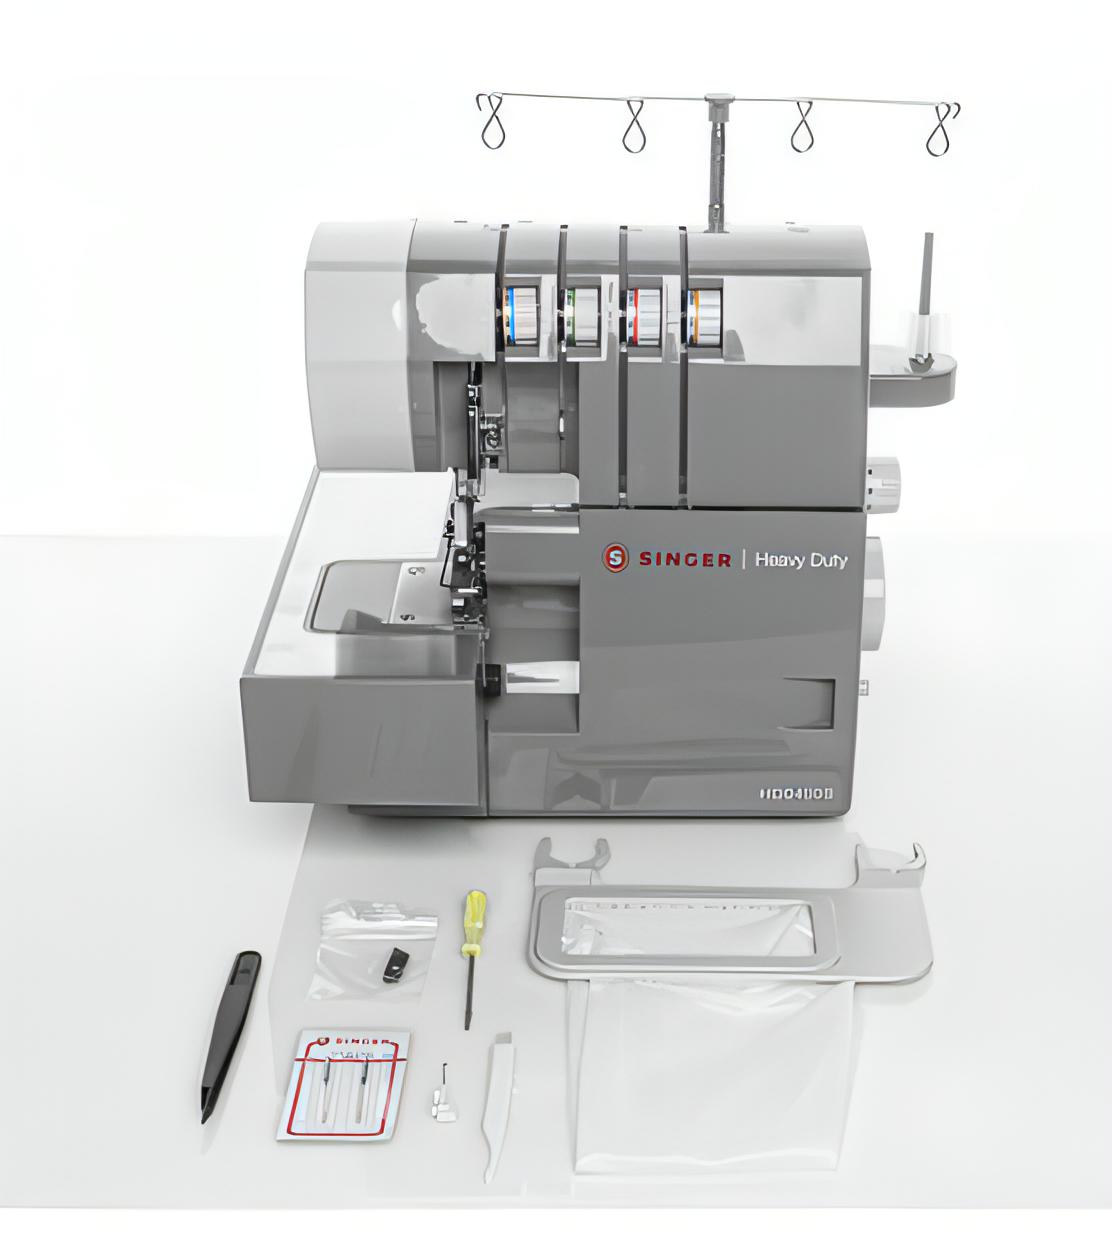 Singer HD0405S Heavy Duty Overlocker 2/3/4 thread overlocker. 1300 stitches per minute with colour coded user friendly threading and enhanced lighting (please allow 3 to 5 days for delivery)